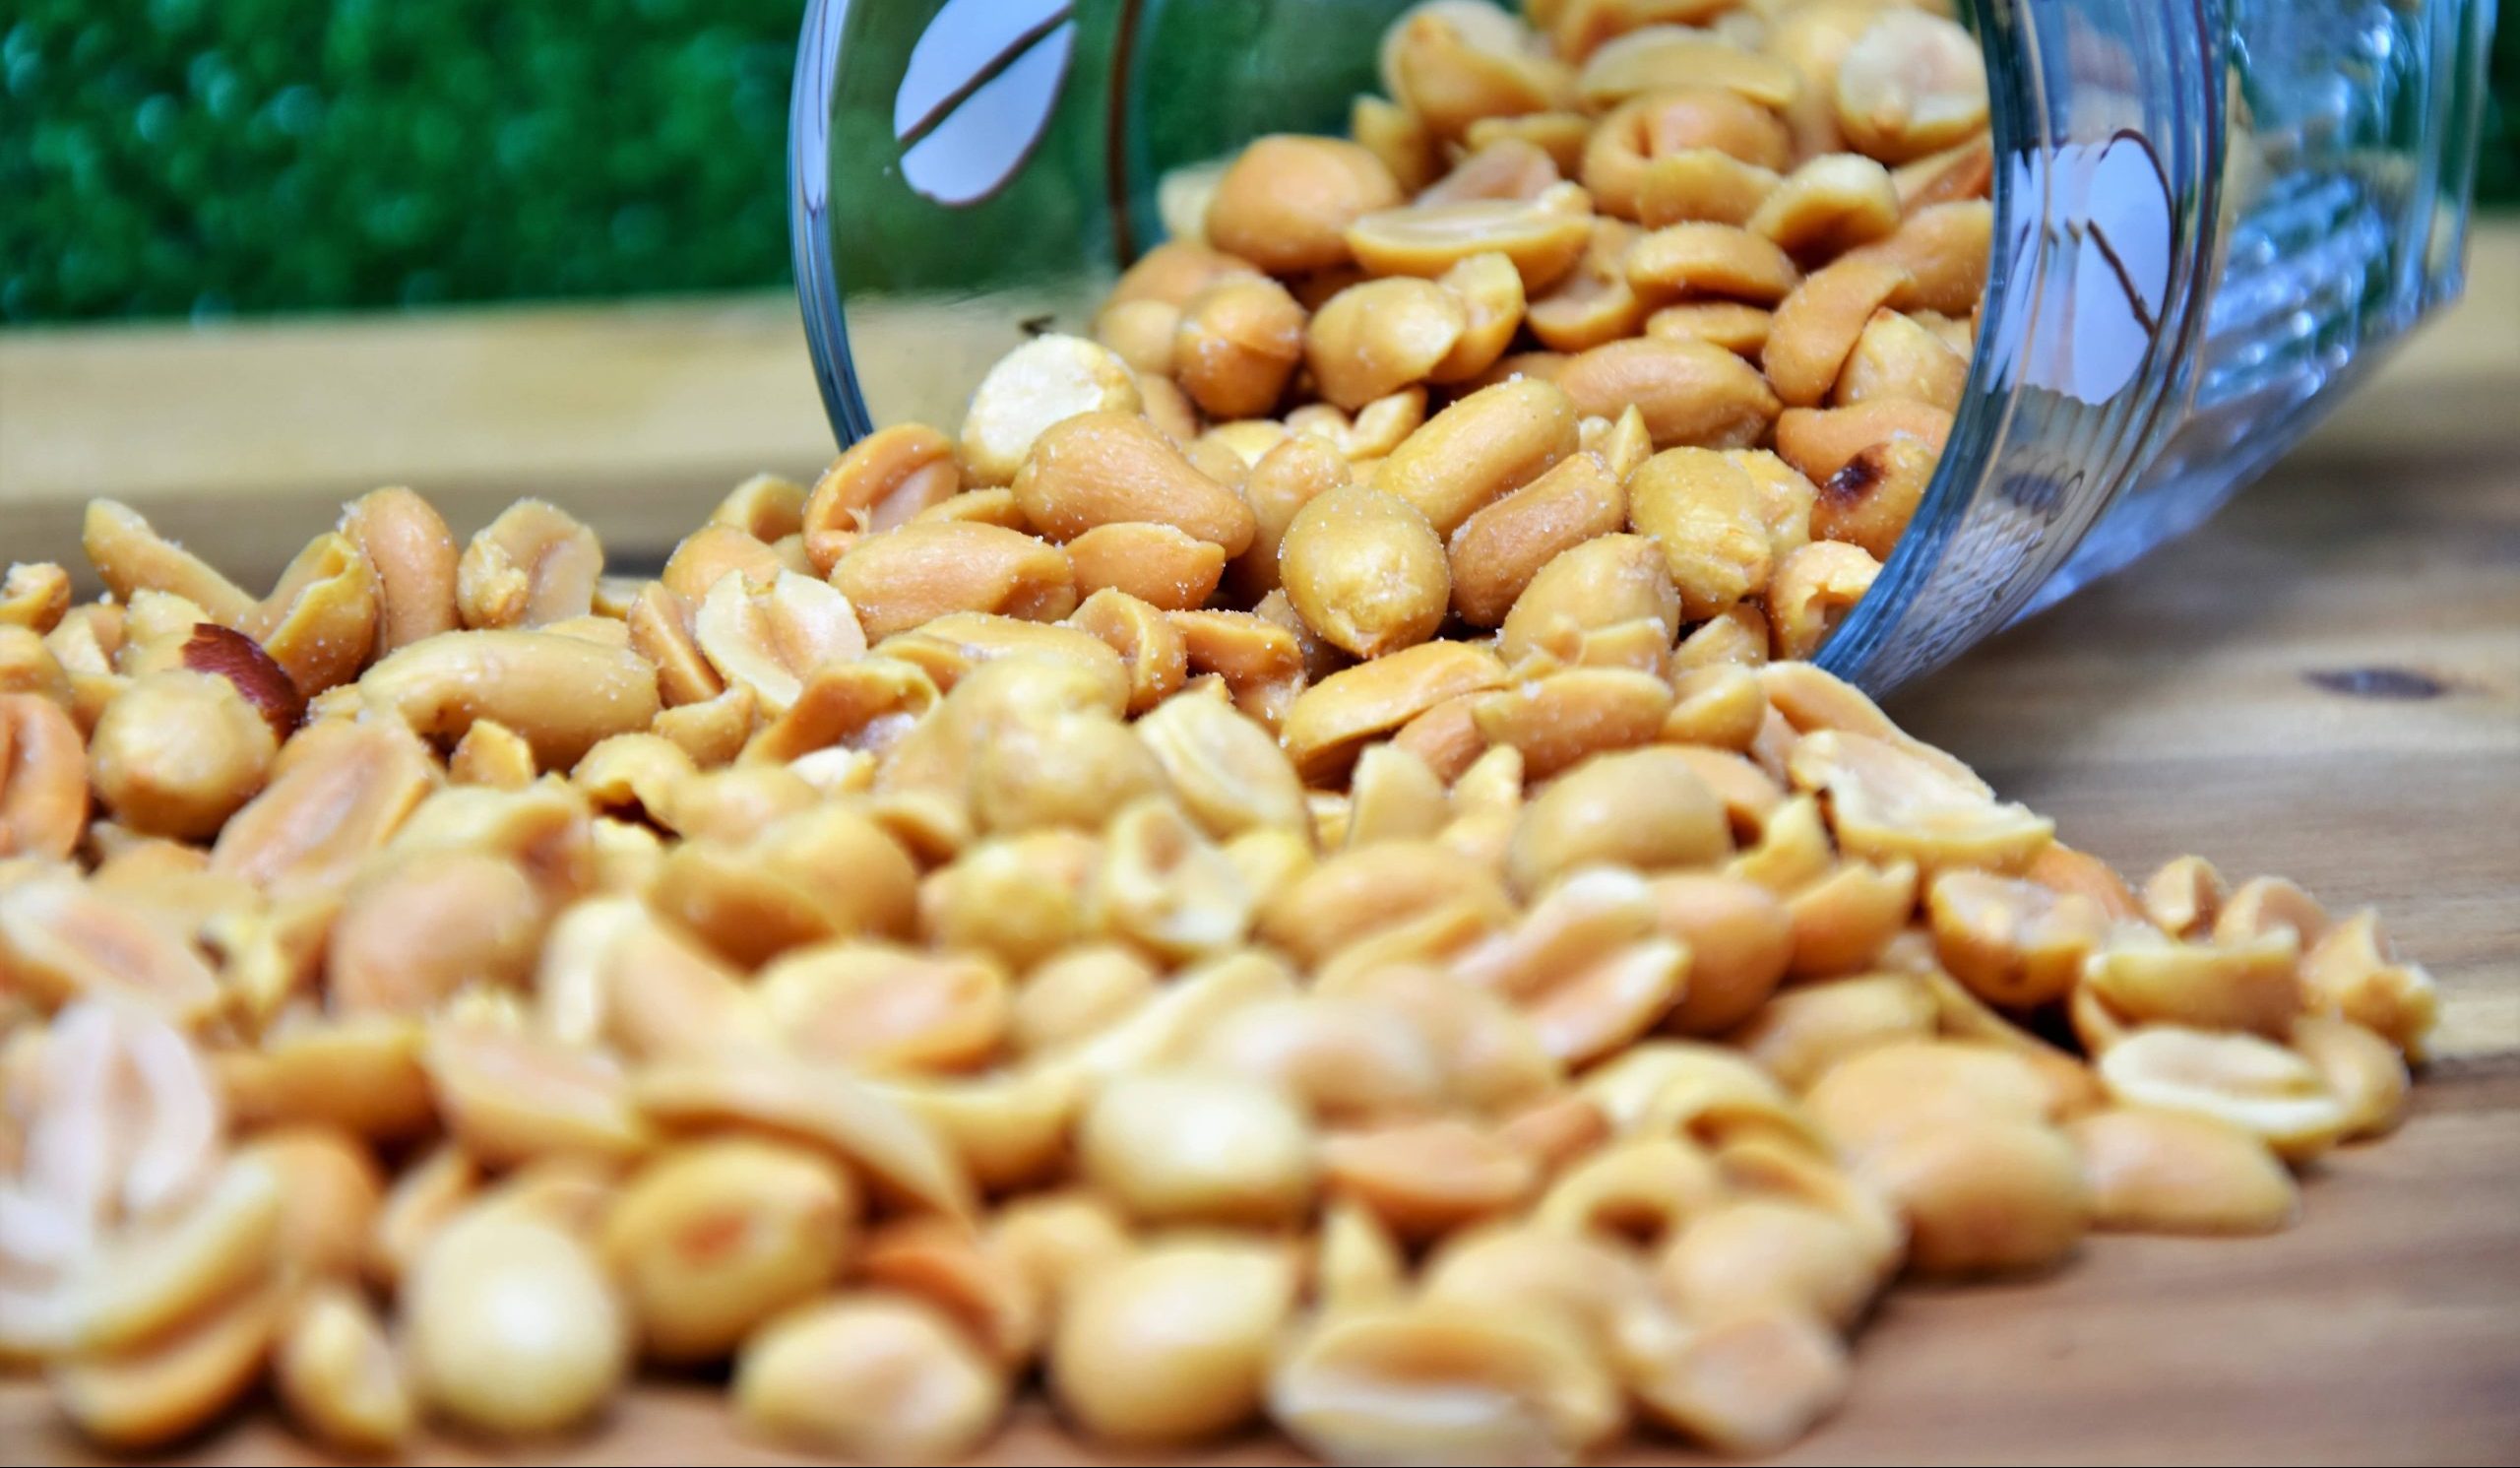  Getting to know roasted peanuts + the exceptional price of buying roasted peanuts 